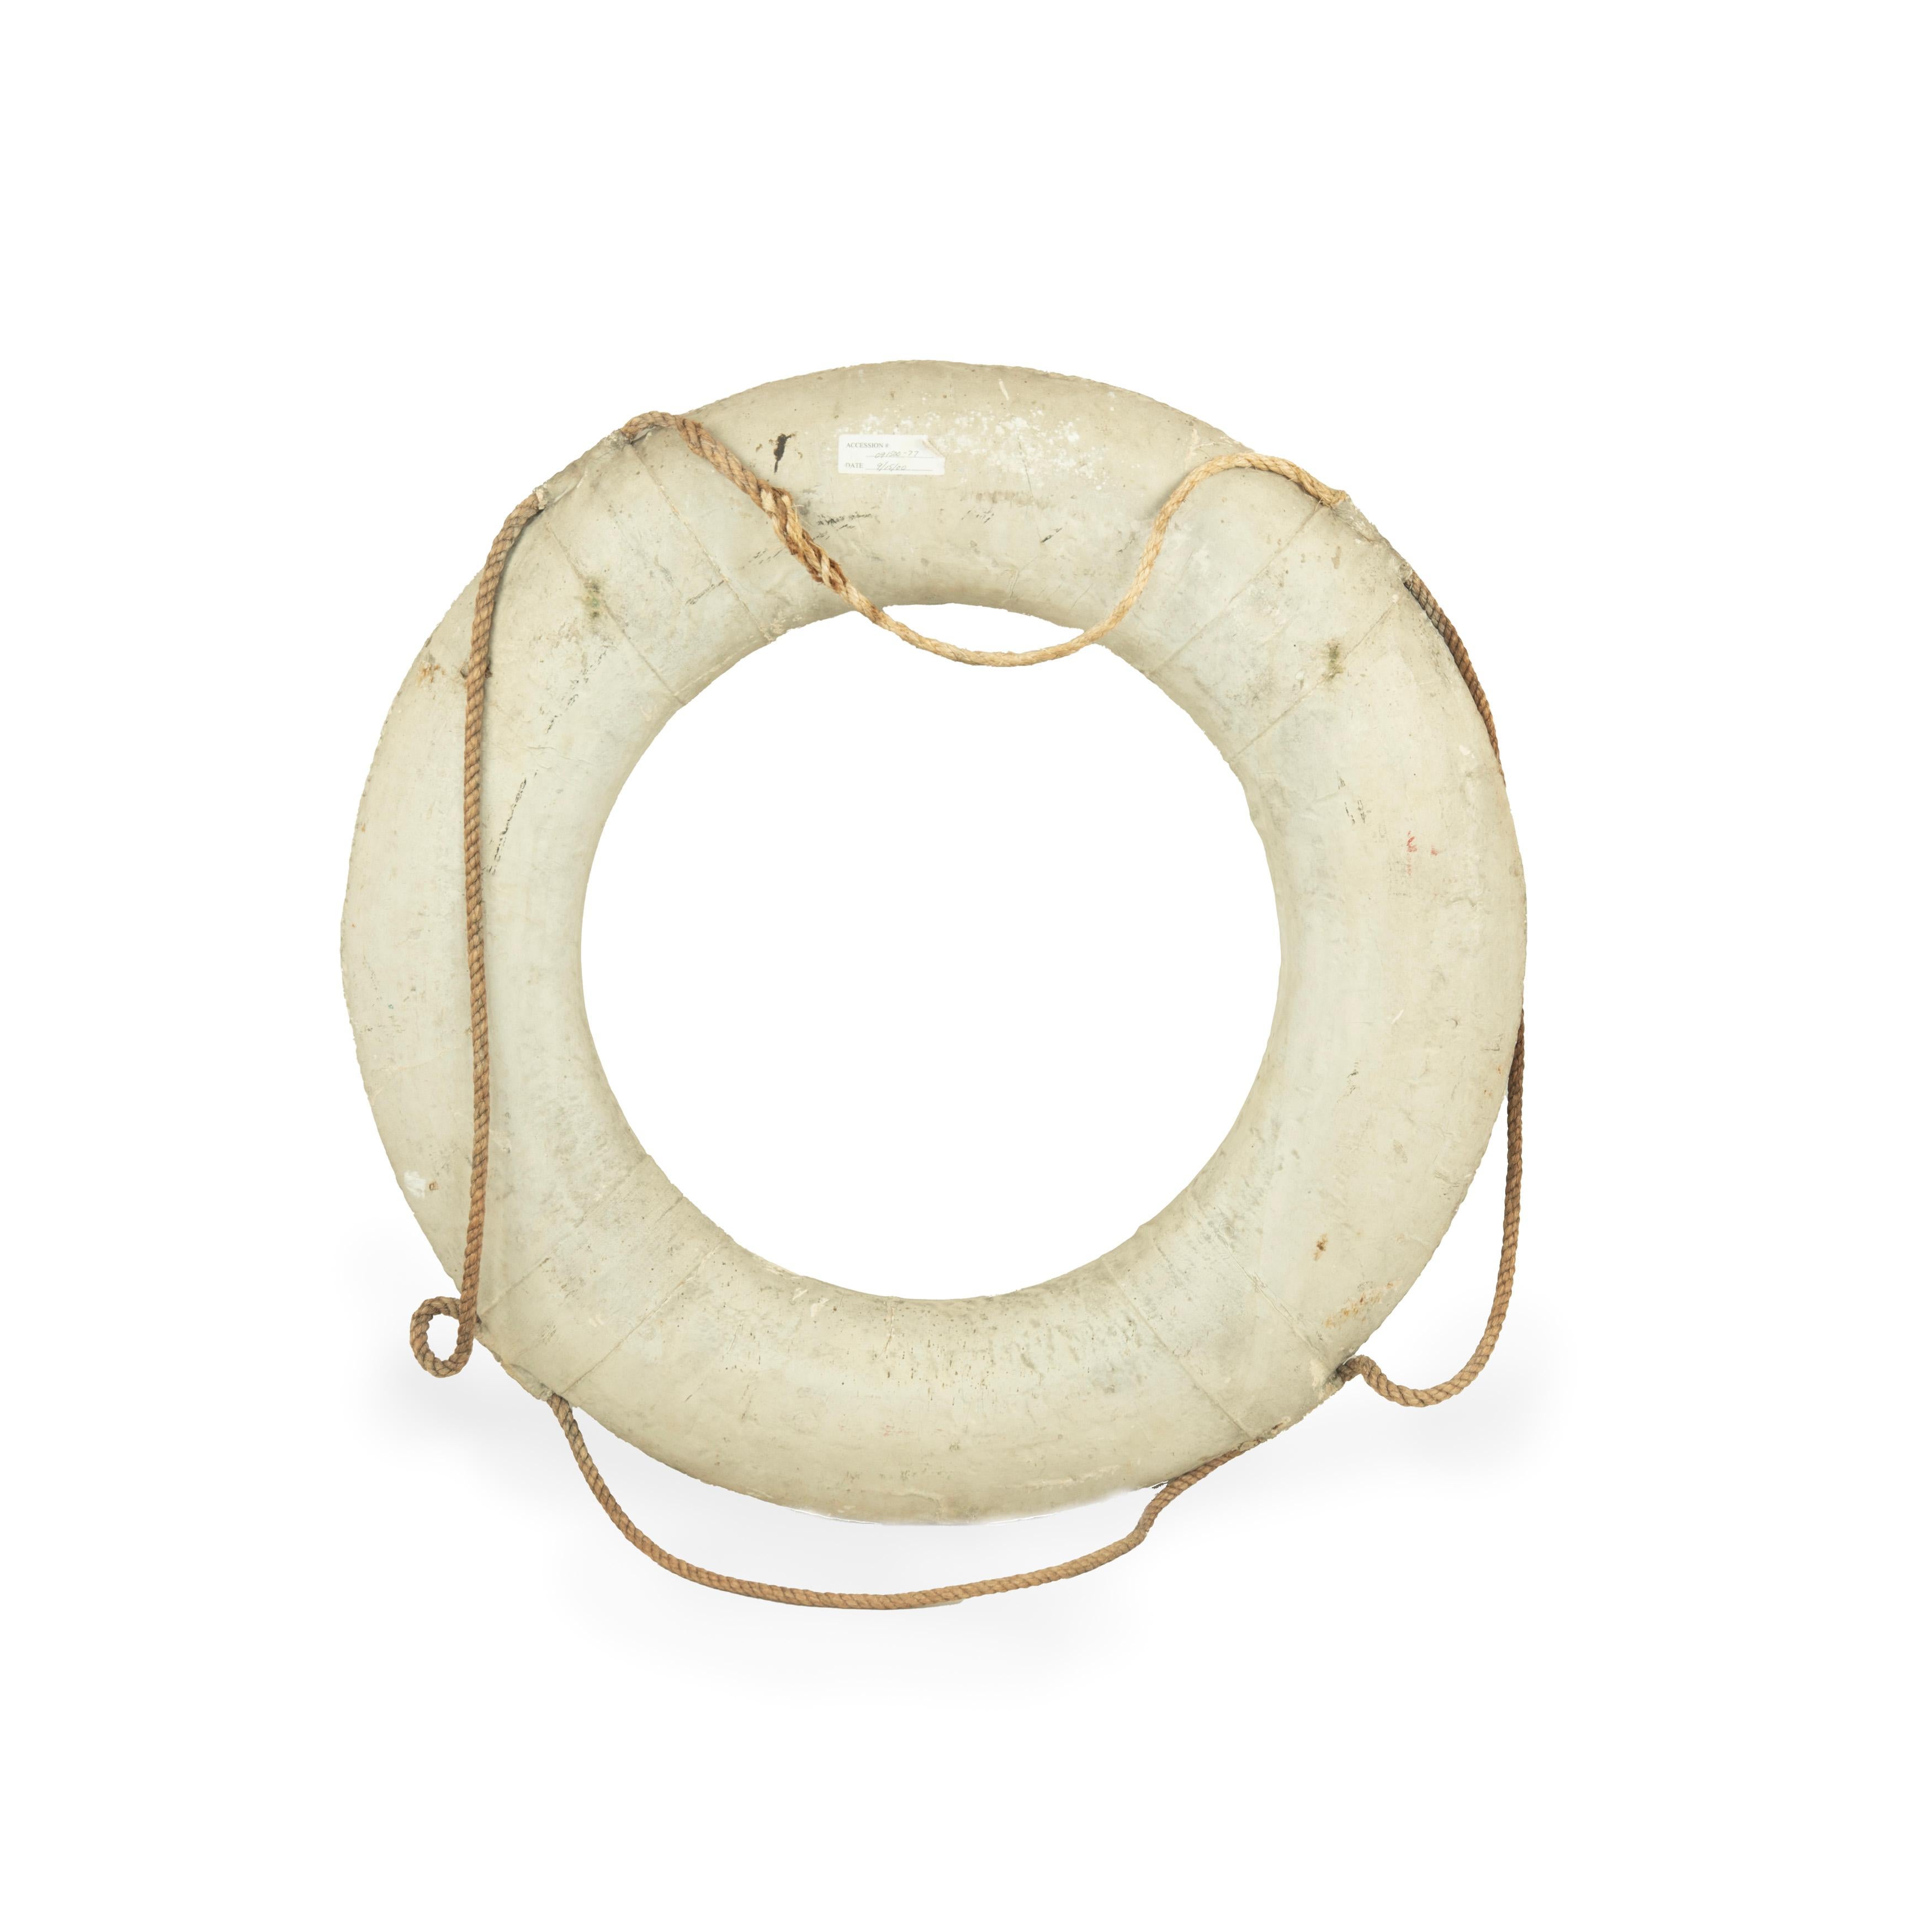 An original life ring from the America’s Cup yacht ‘Shamrock’, Royal Ulster Yach In Good Condition For Sale In Lymington, Hampshire